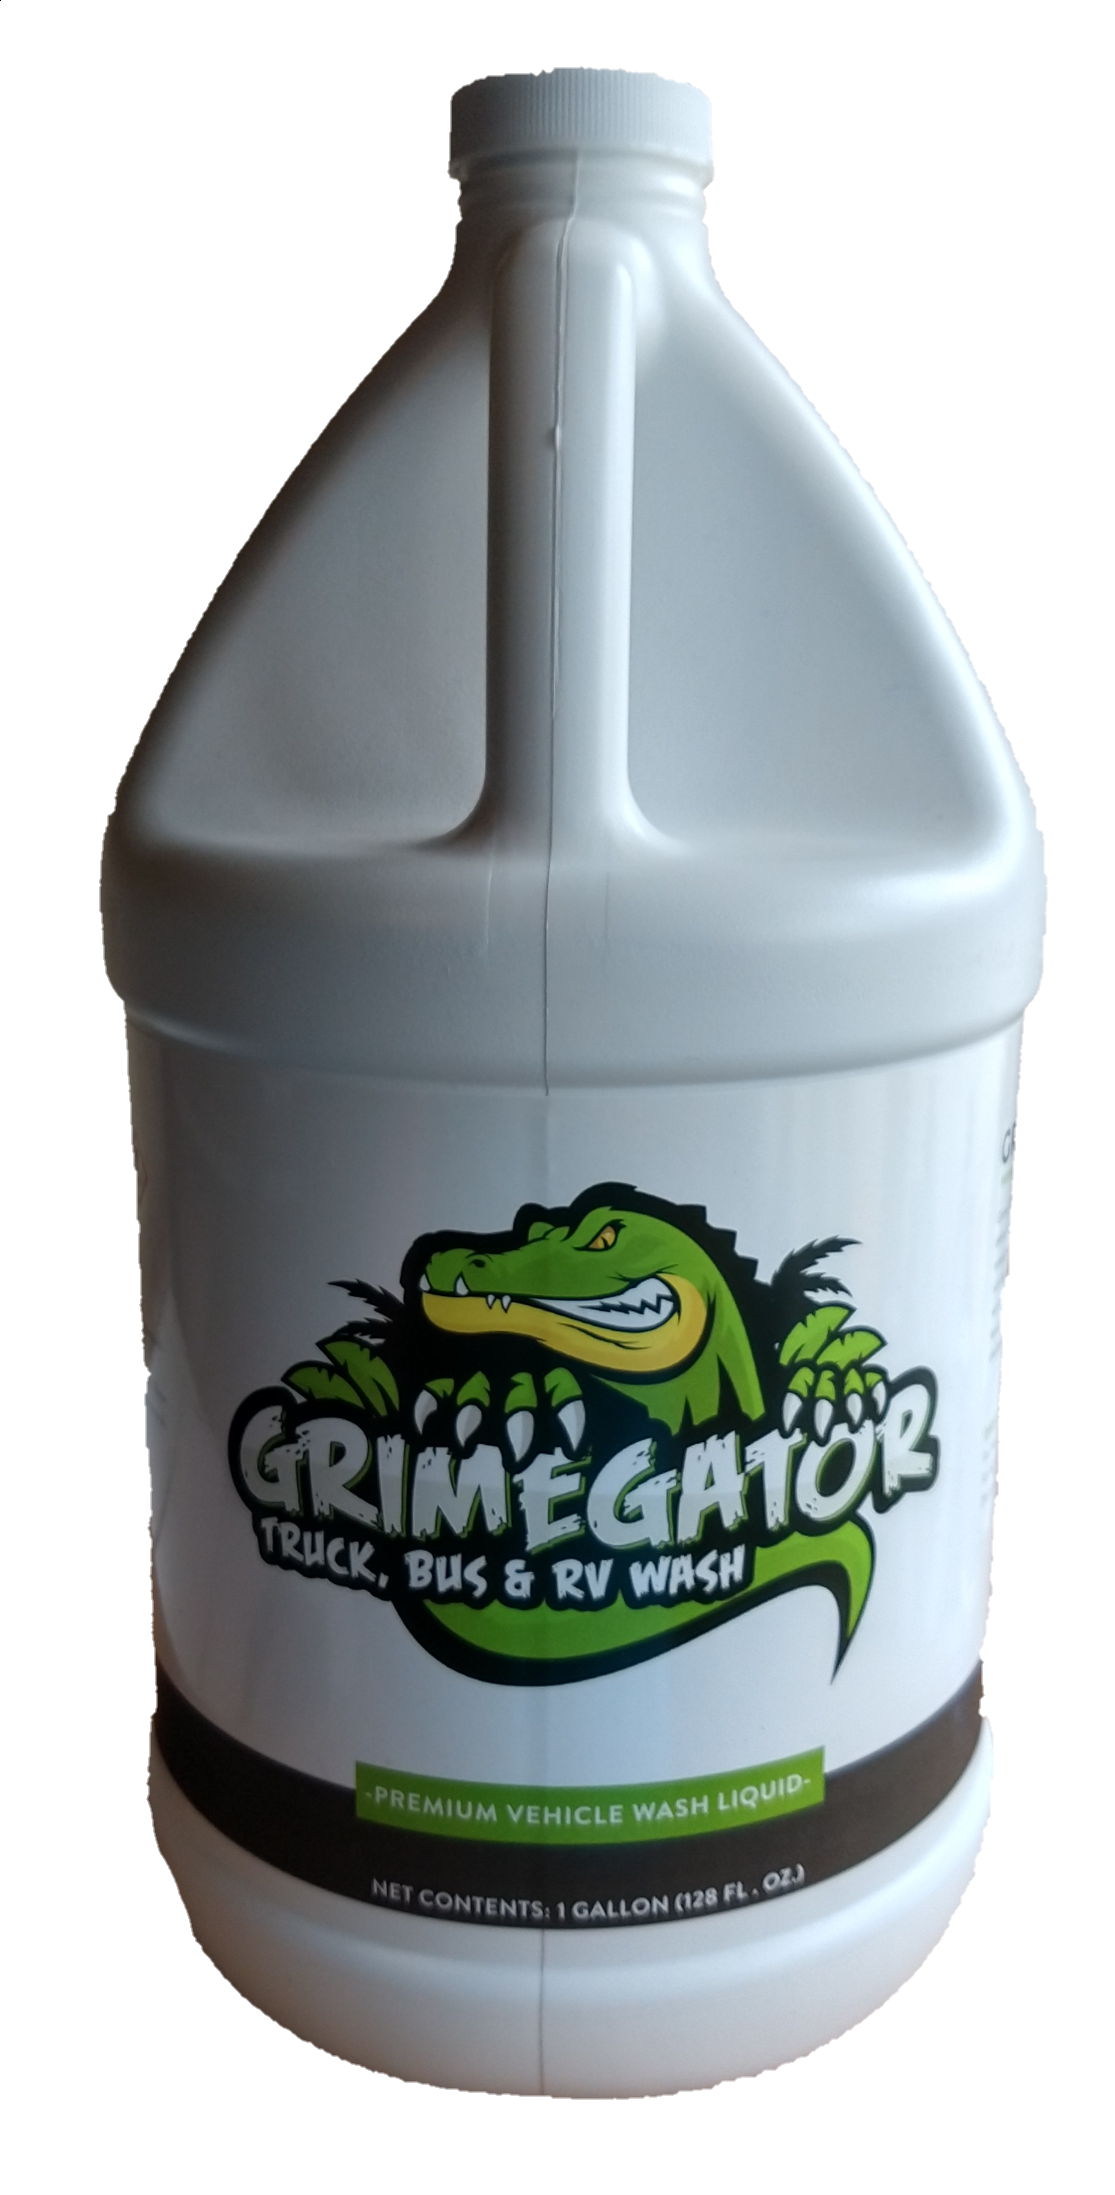 Grime Gator Truck, Bus, and RV Wash